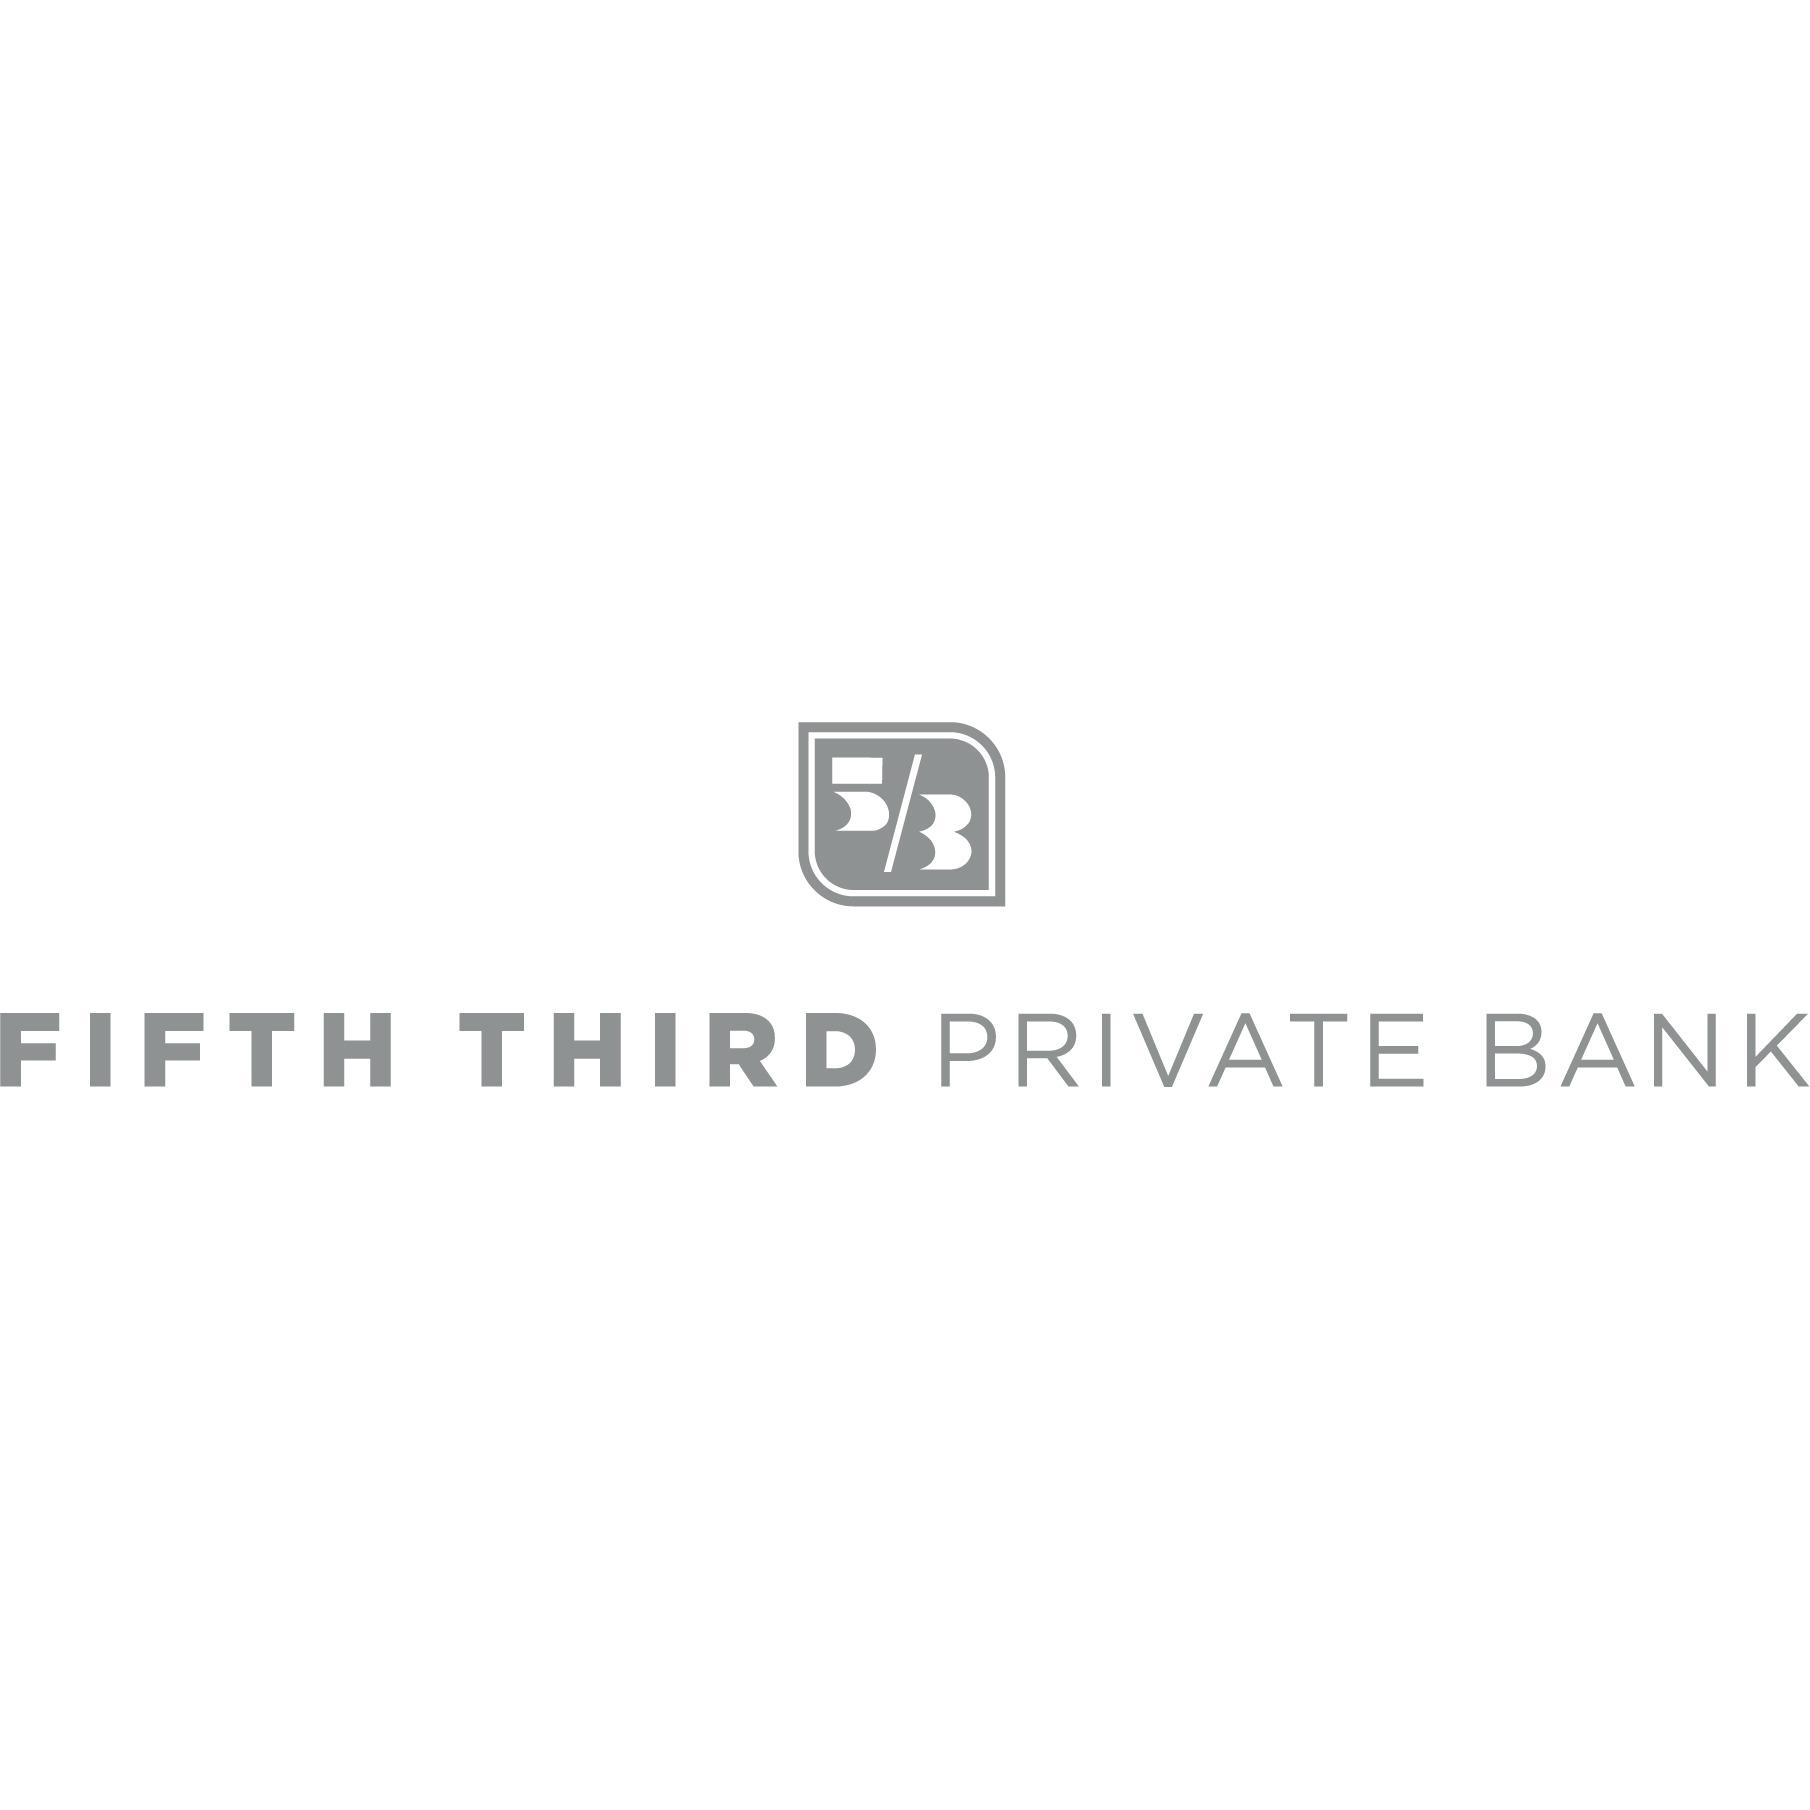 Fifth Third Private Bank - Charles Grimm Photo